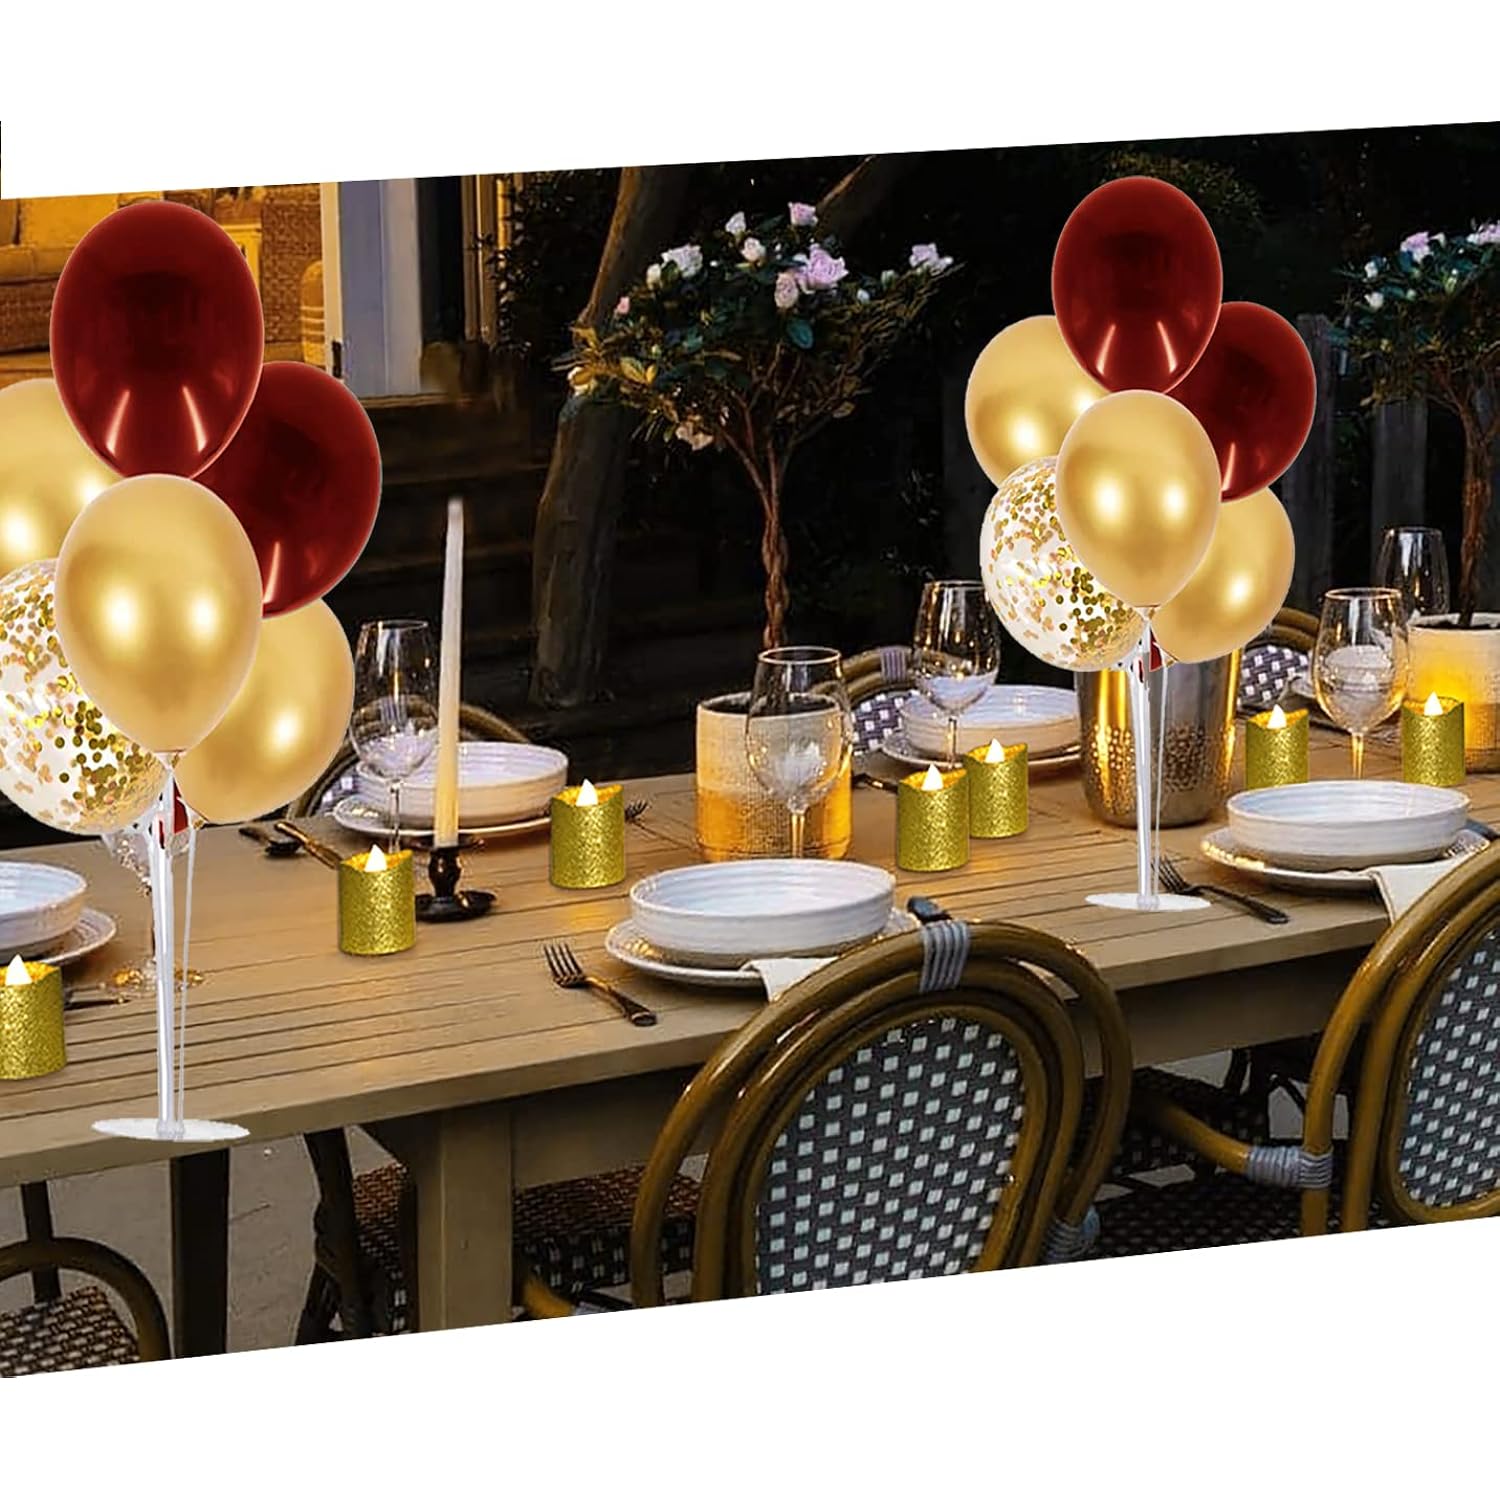 EBD Products Burgundy Gold Balloons 2 Set Table Centerpiece Balloons Stand Kit 15Pcs Burgundy Gold Balloons For F SEA8188344